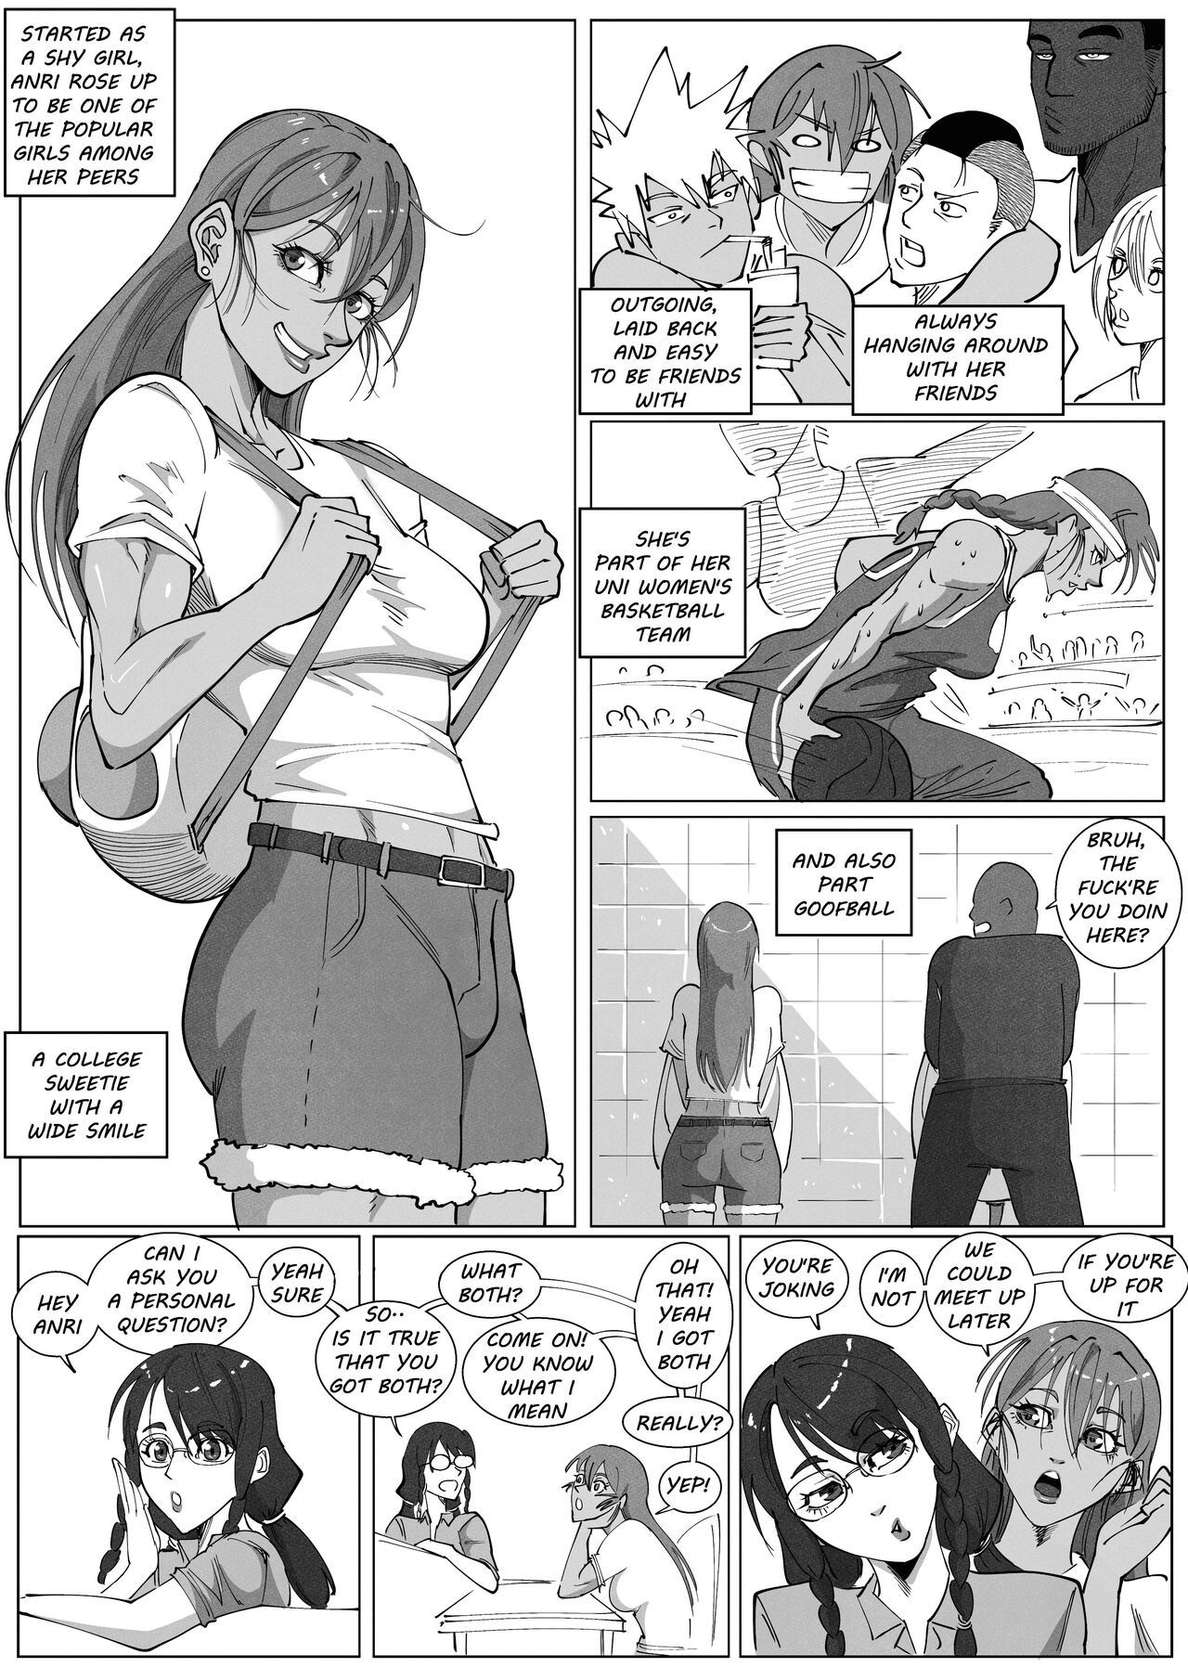 [UselessBegging] GNO: Girl's Night Out - Issue 02 [public/censored][ongoing]